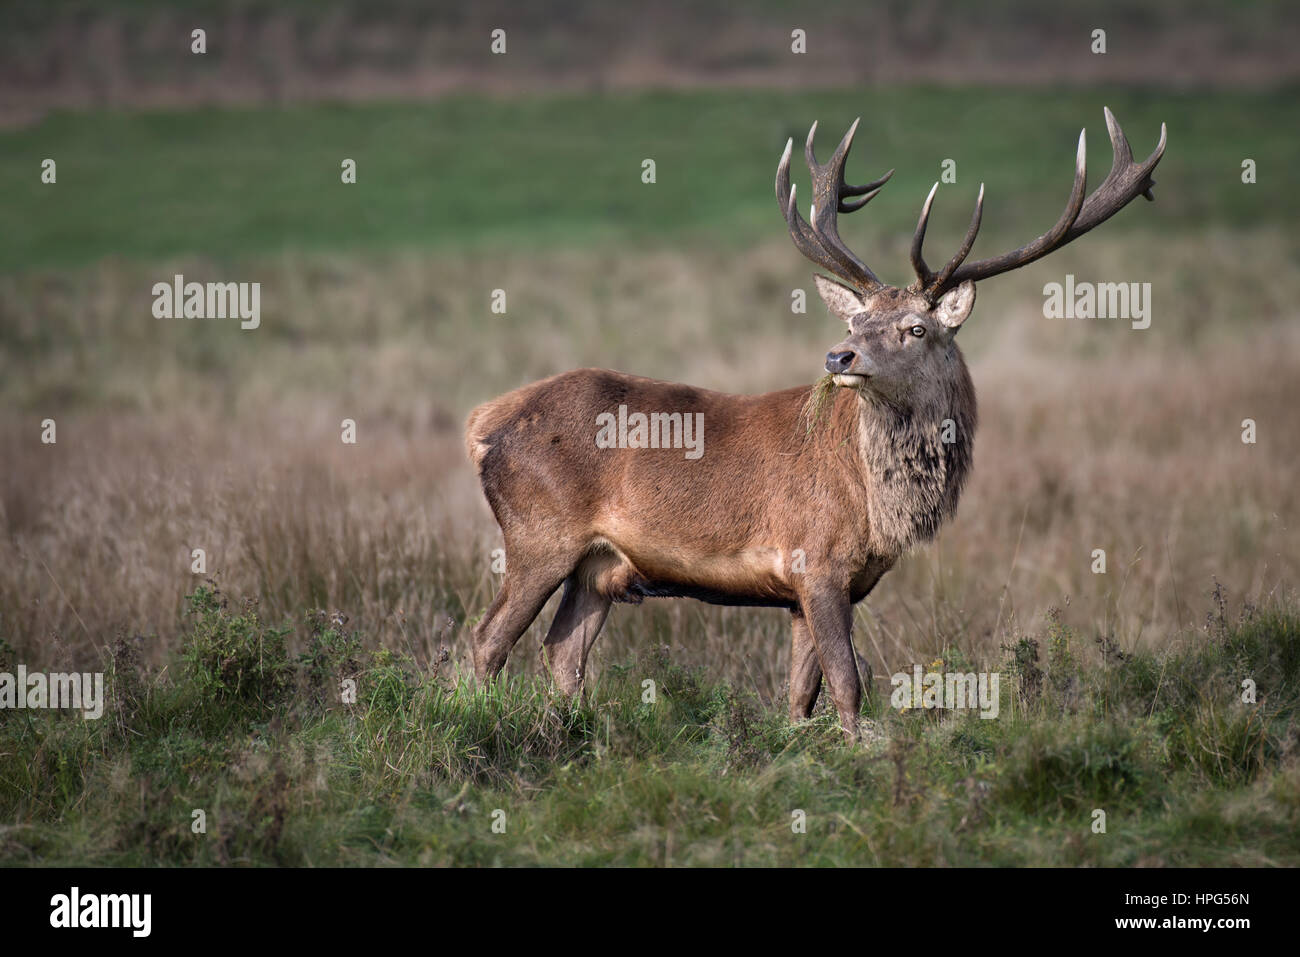 A full photograph of a grazing 14 point imperial red deer stag looking slightly back with grass in its mouth Stock Photo